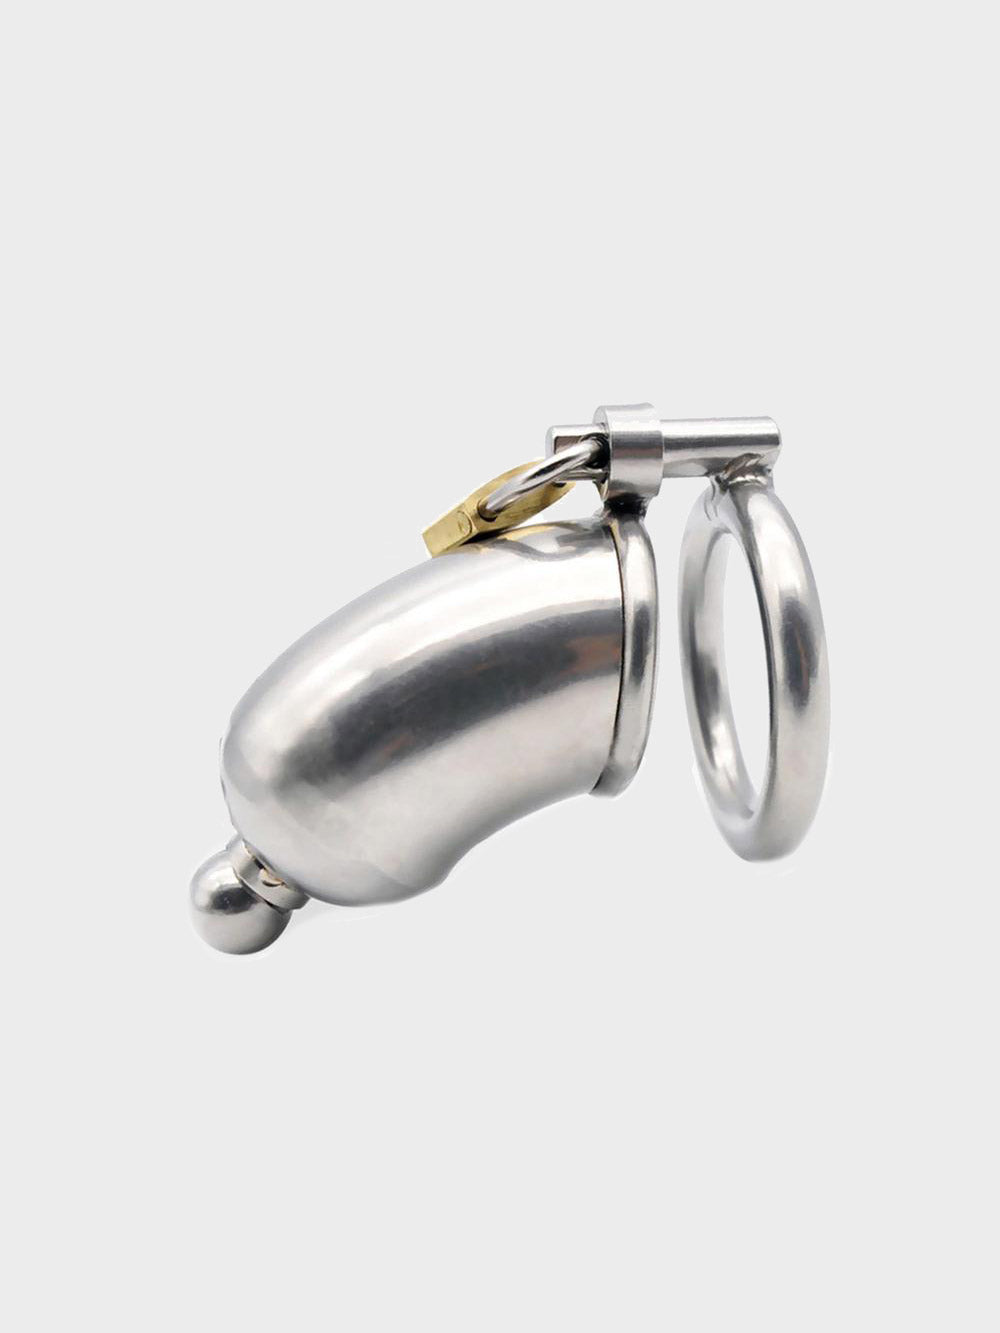 Solitary Confinement Steel Chastity Cage | Chastity Cages Co